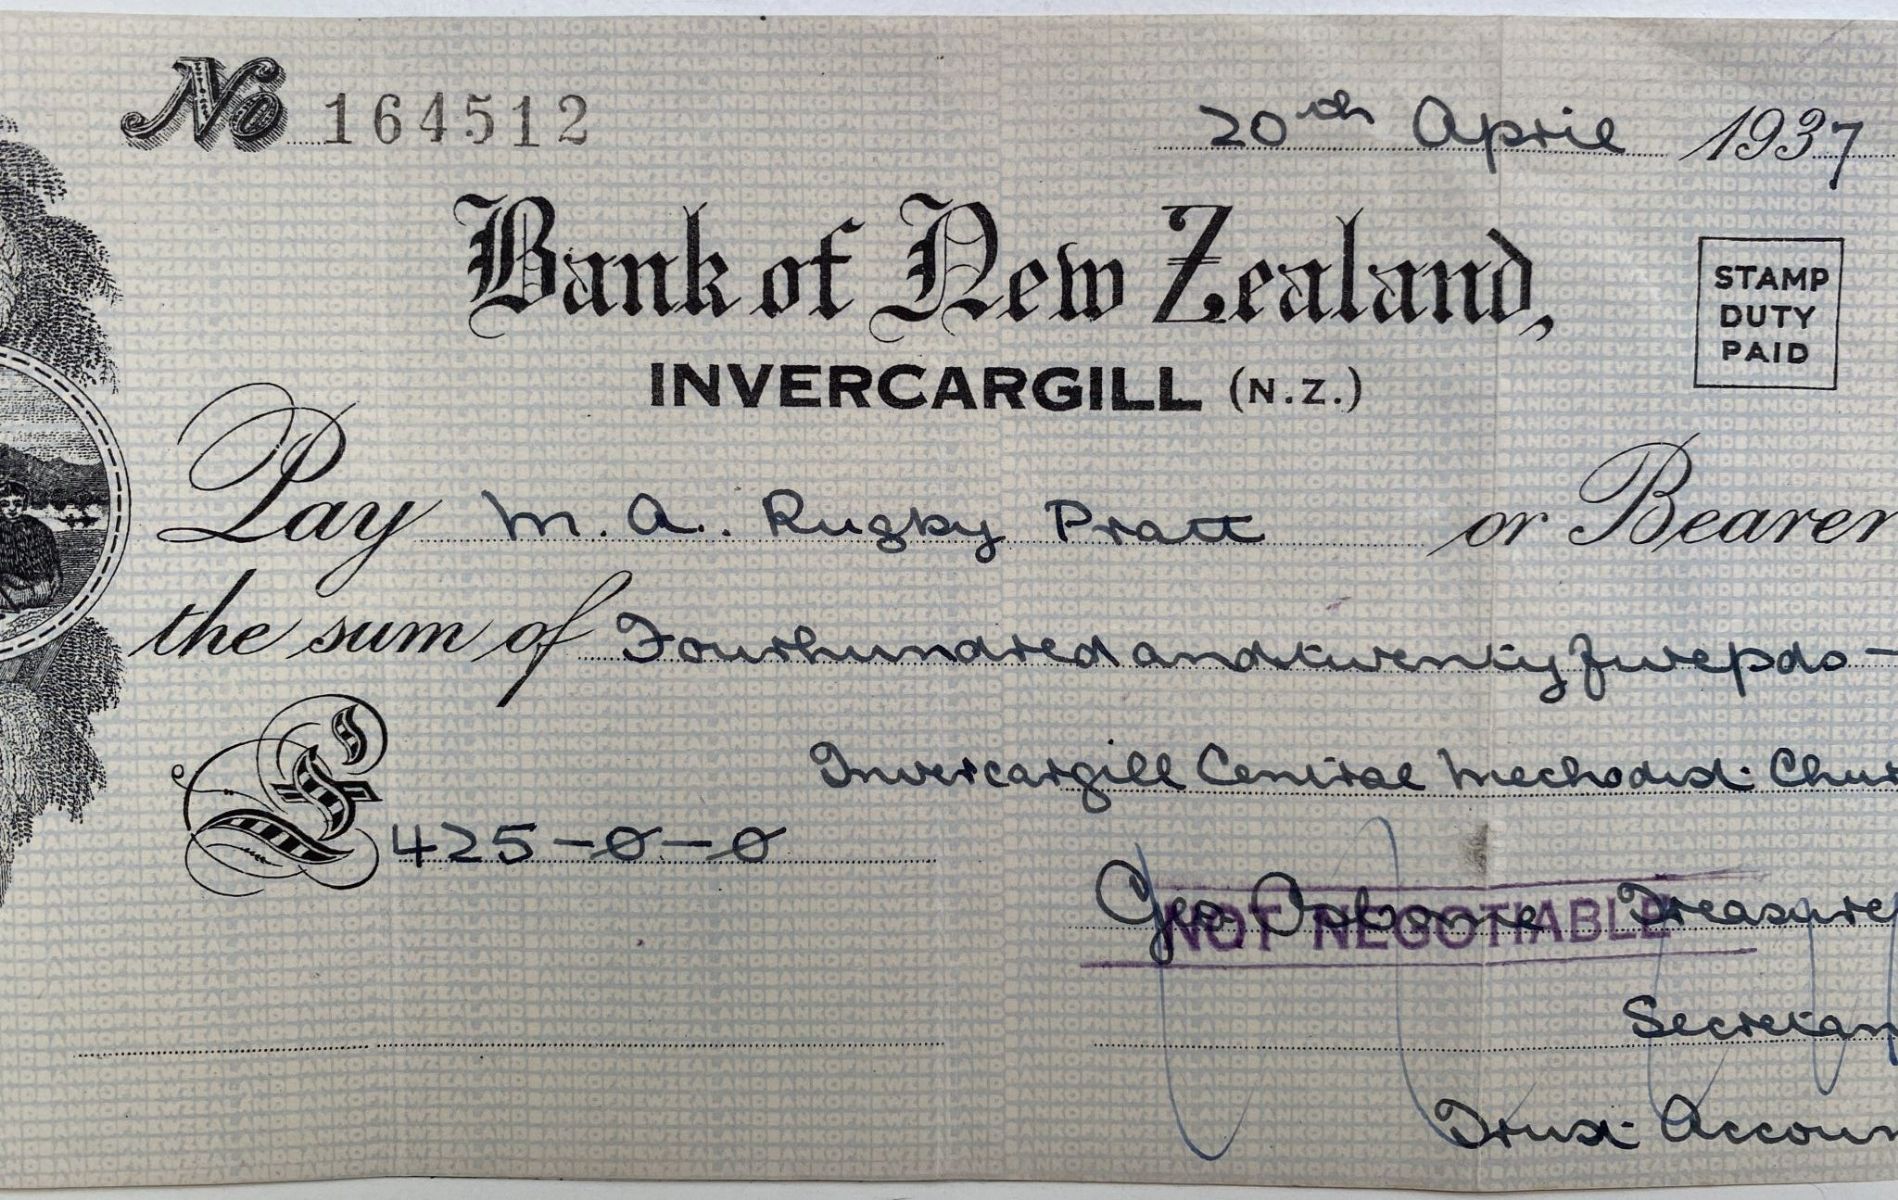 OLD BANKING MEMORABILIA: Bank cheque issued by BNZ Bank, Invercargill 1937